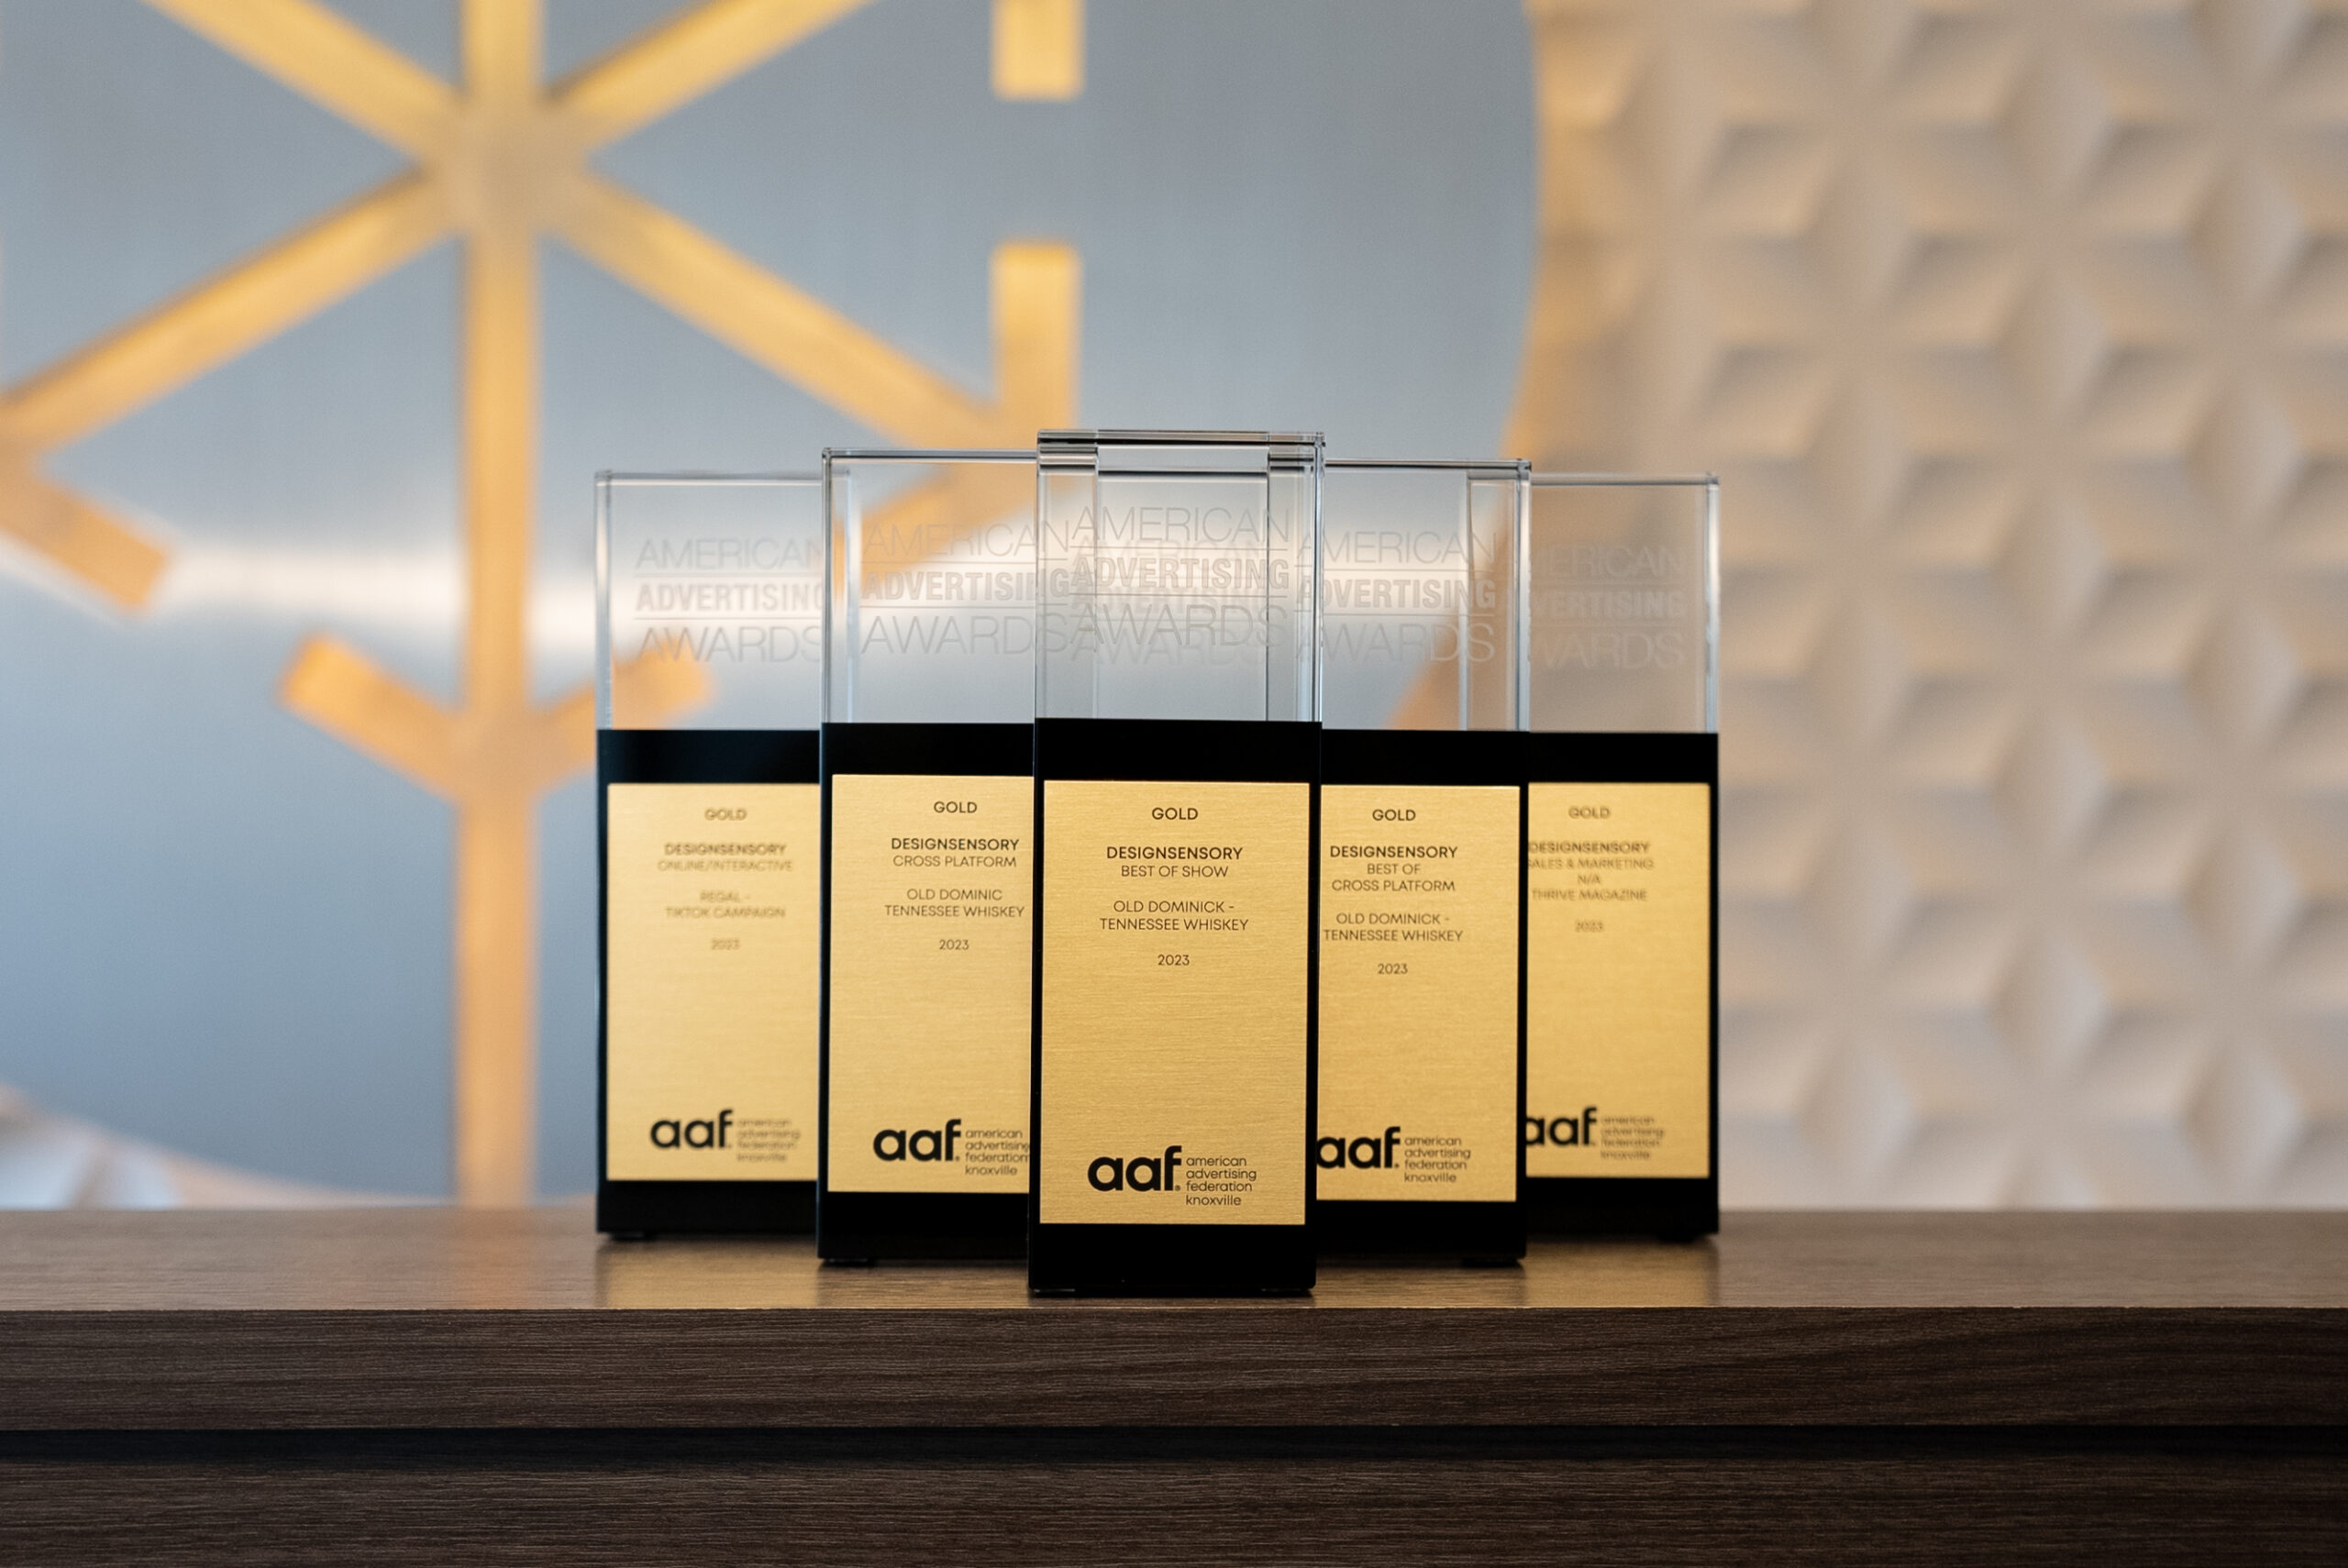 Bringing the Spark and Bringing Home Best of Show at the Addy Awards